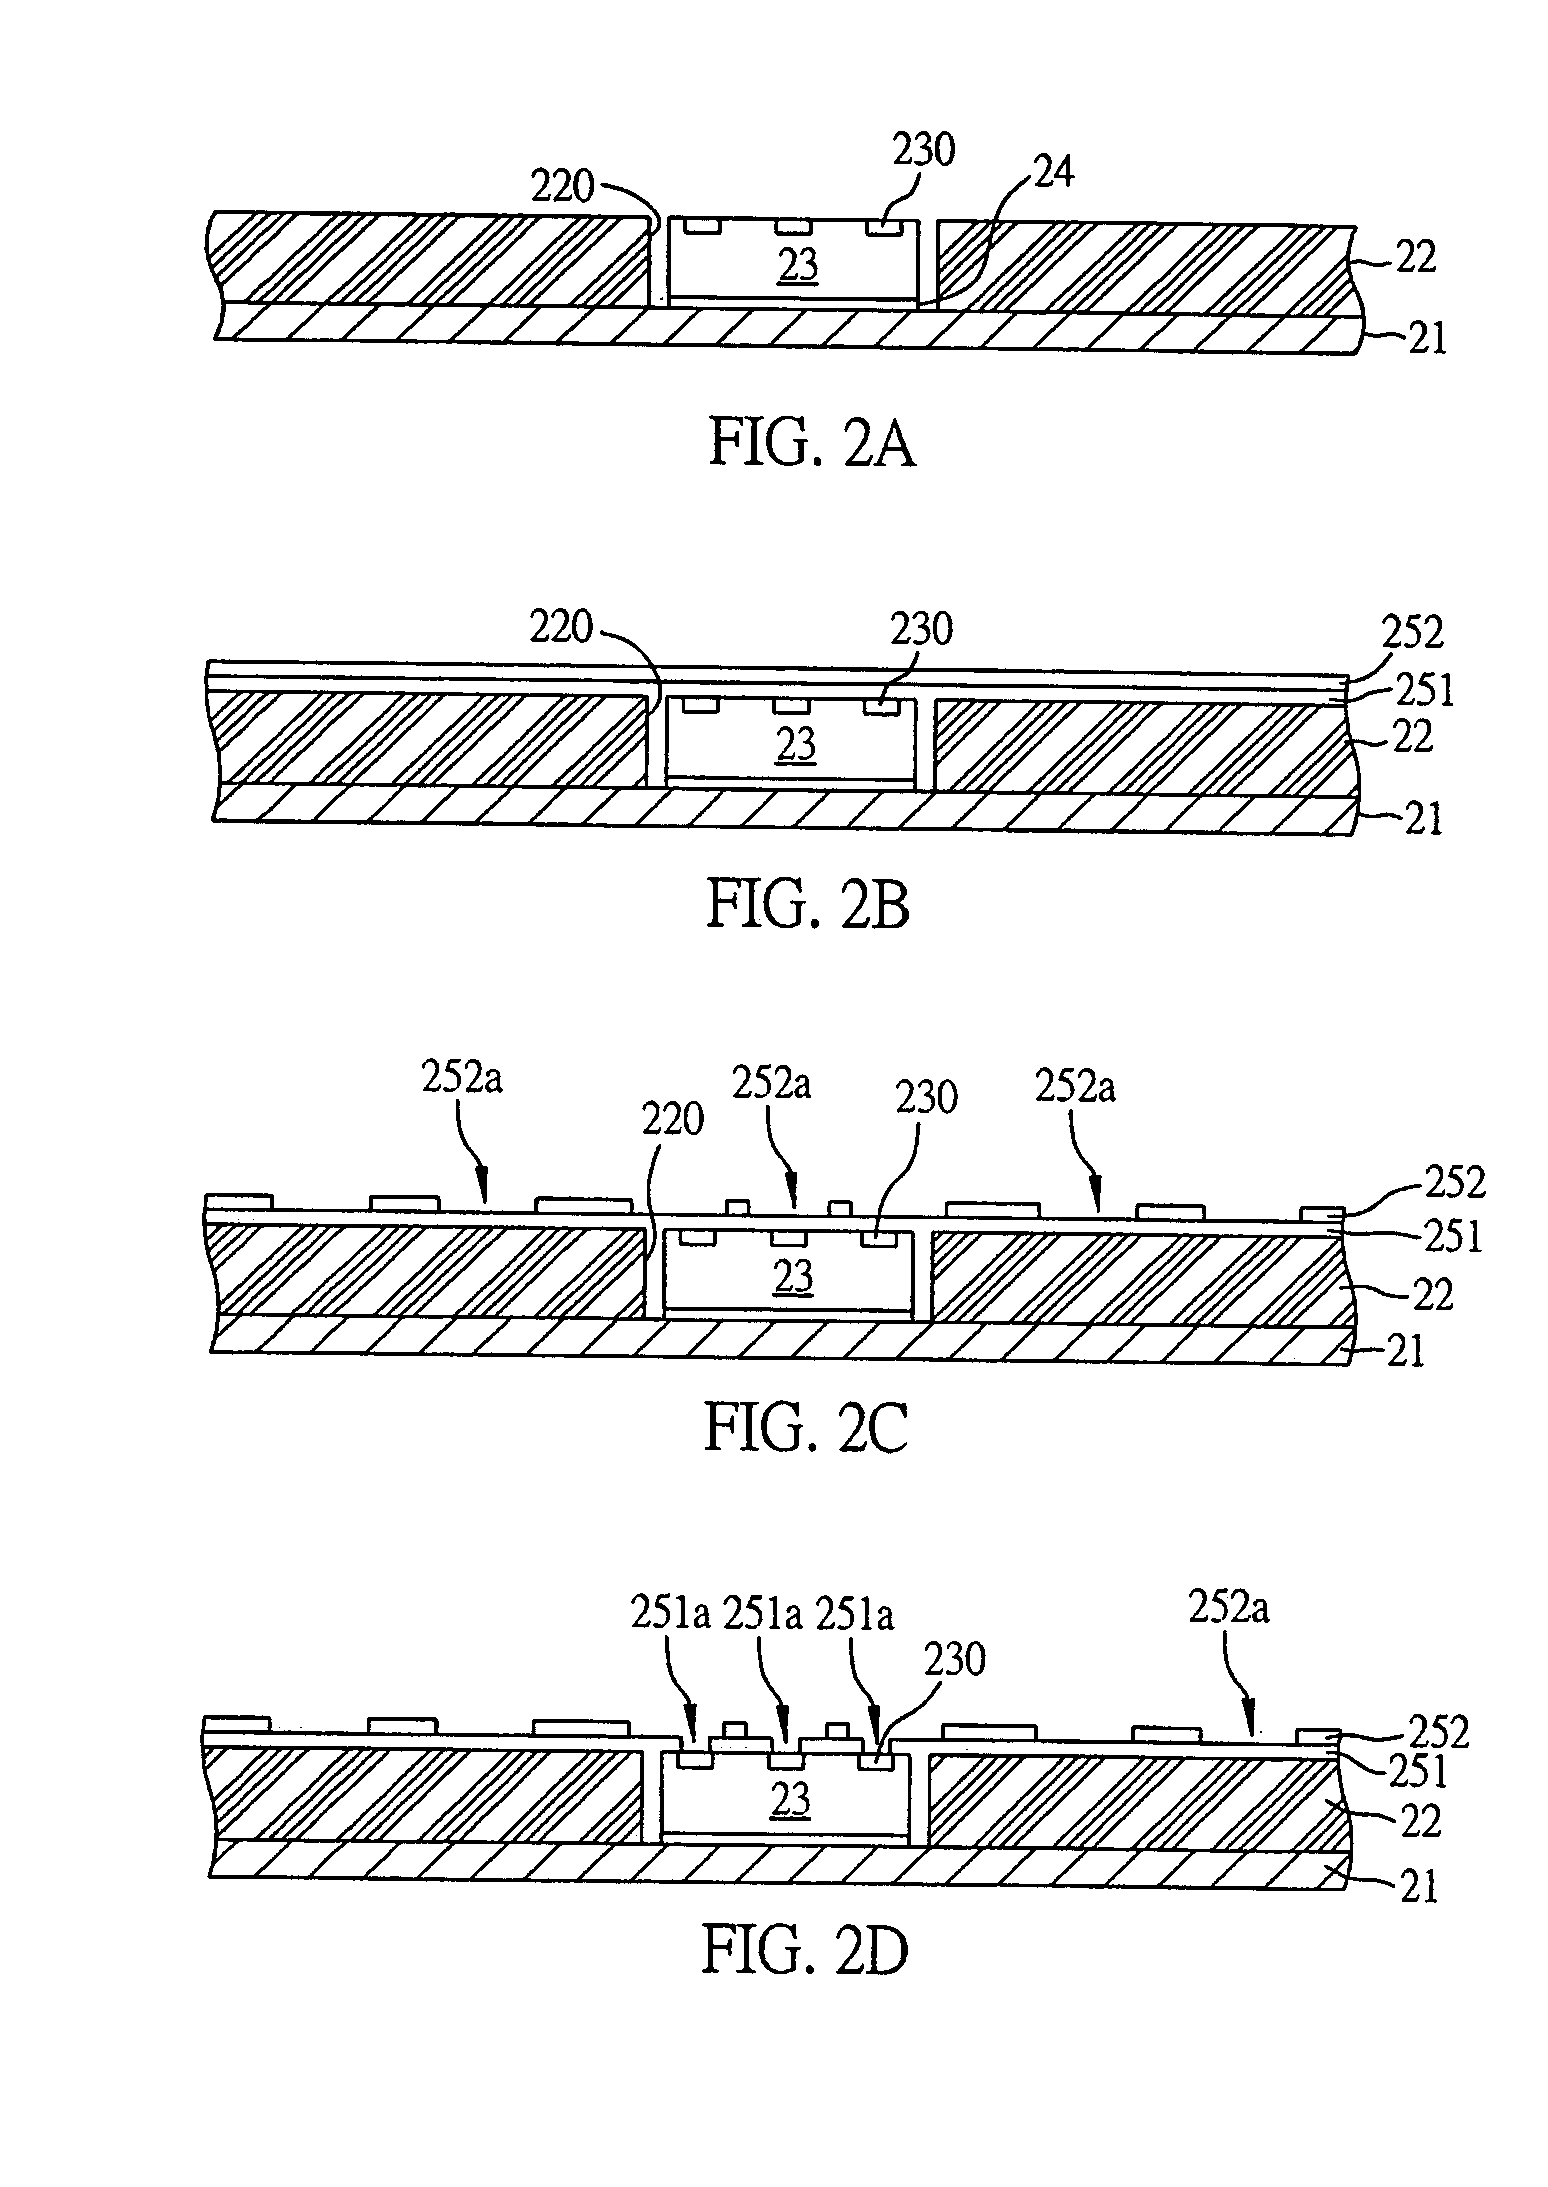 Superfine-circuit semiconductor package structure